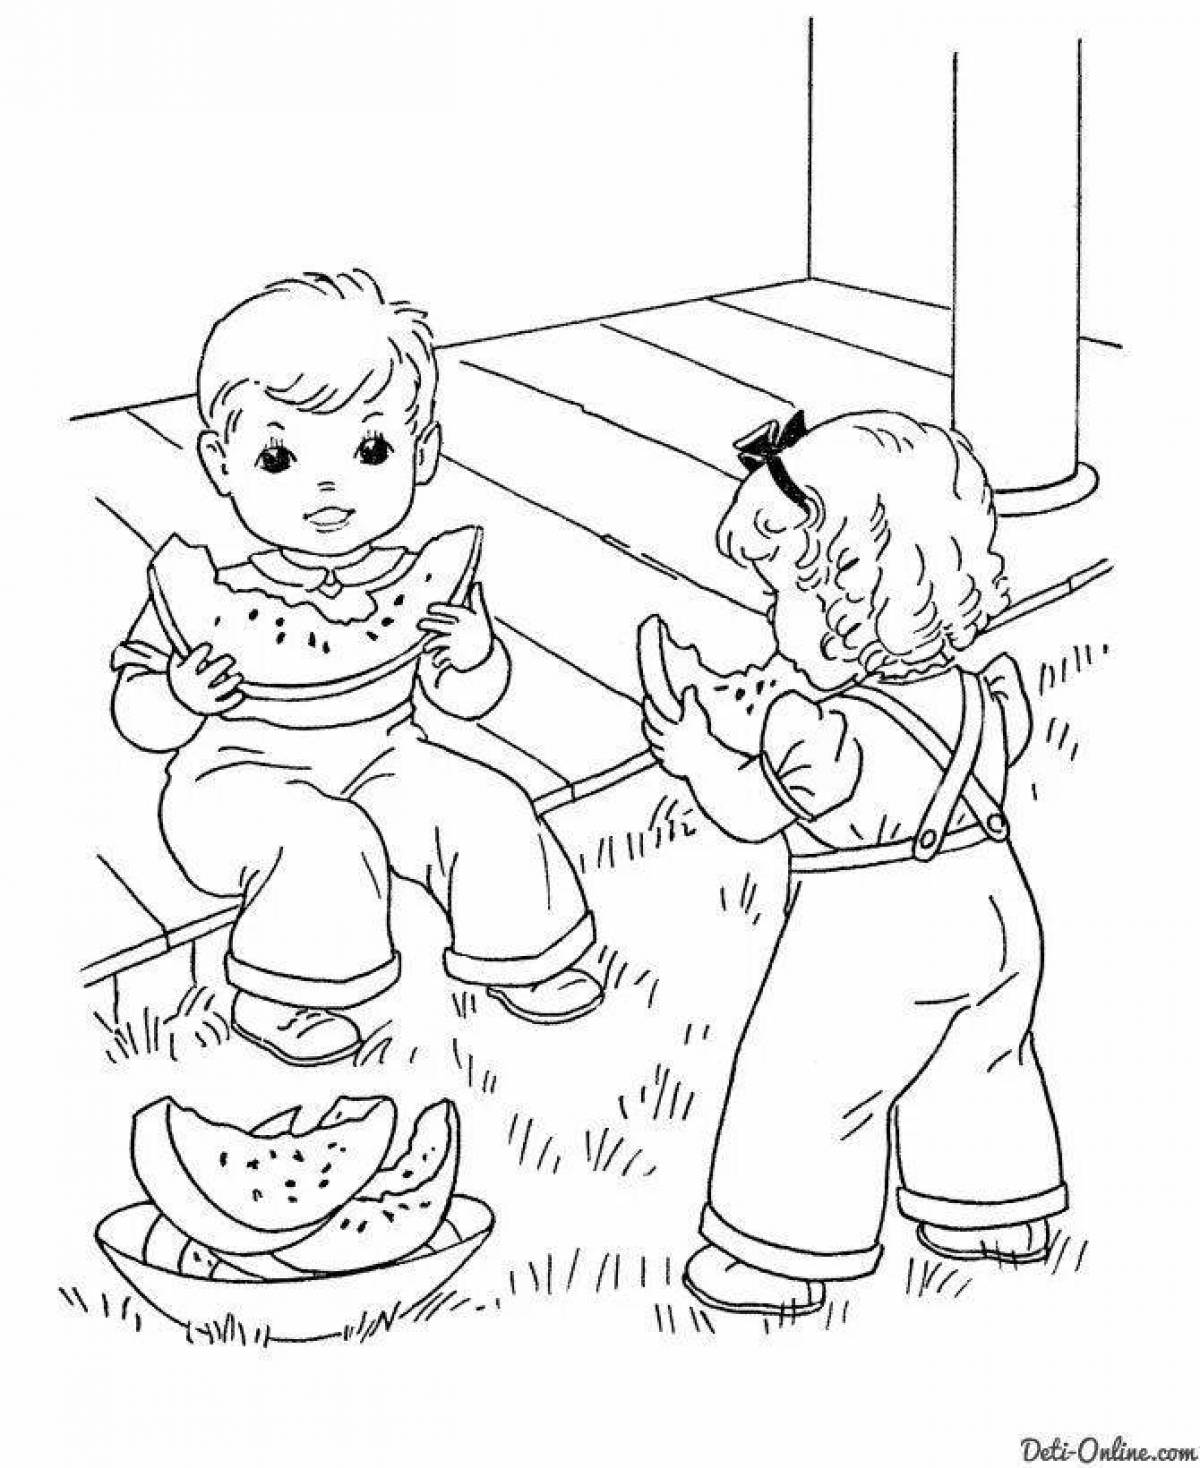 Animated childhood coloring page